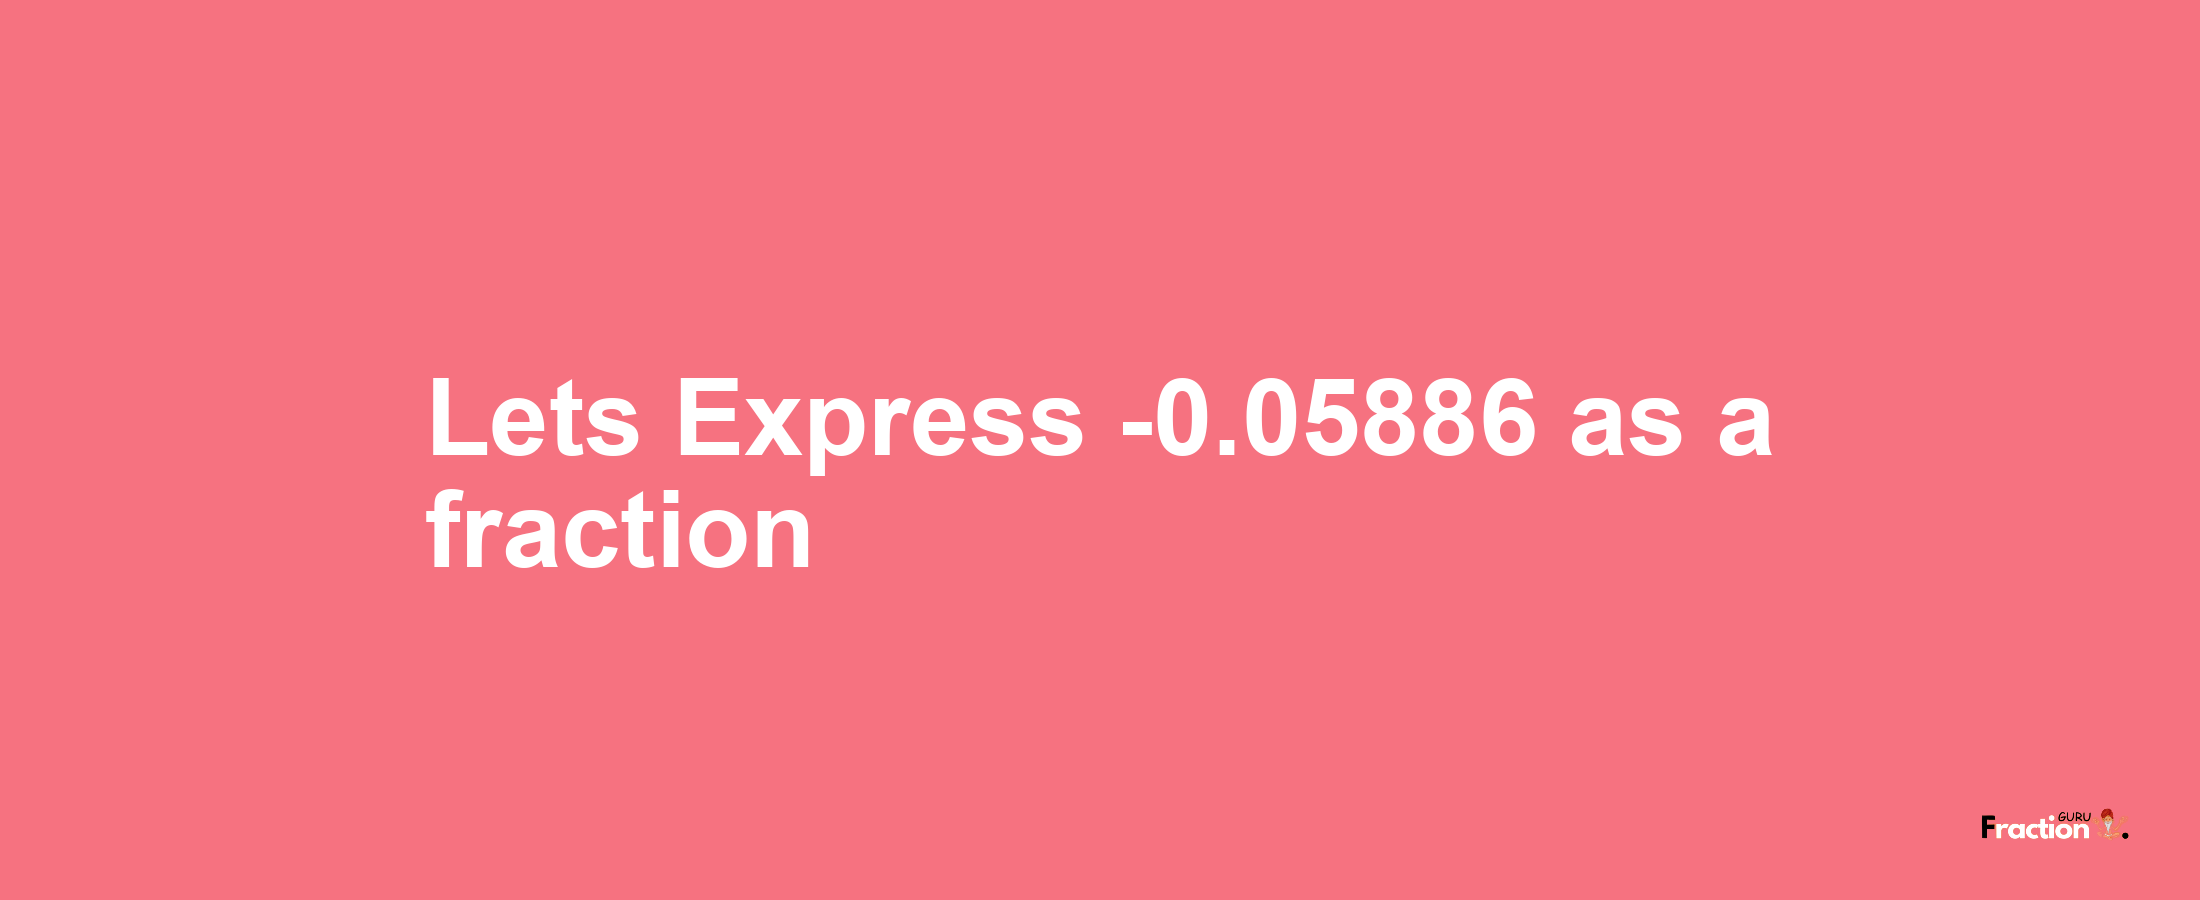 Lets Express -0.05886 as afraction